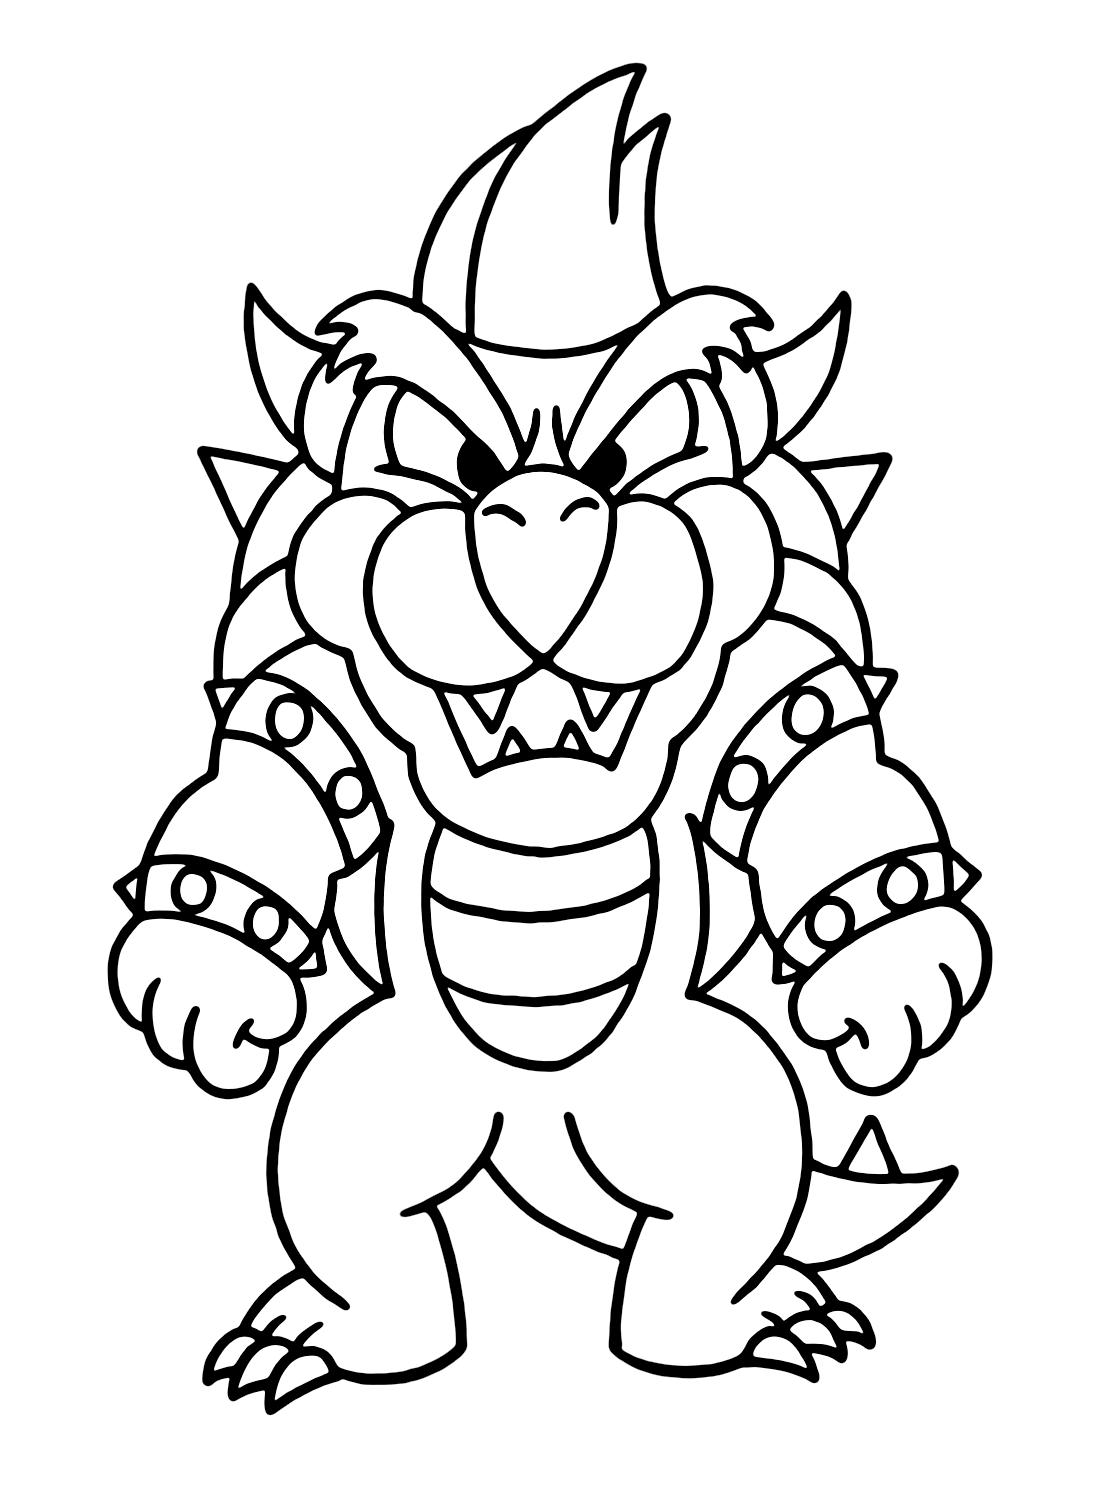 Draw Bowser from Super Mario Coloring Page